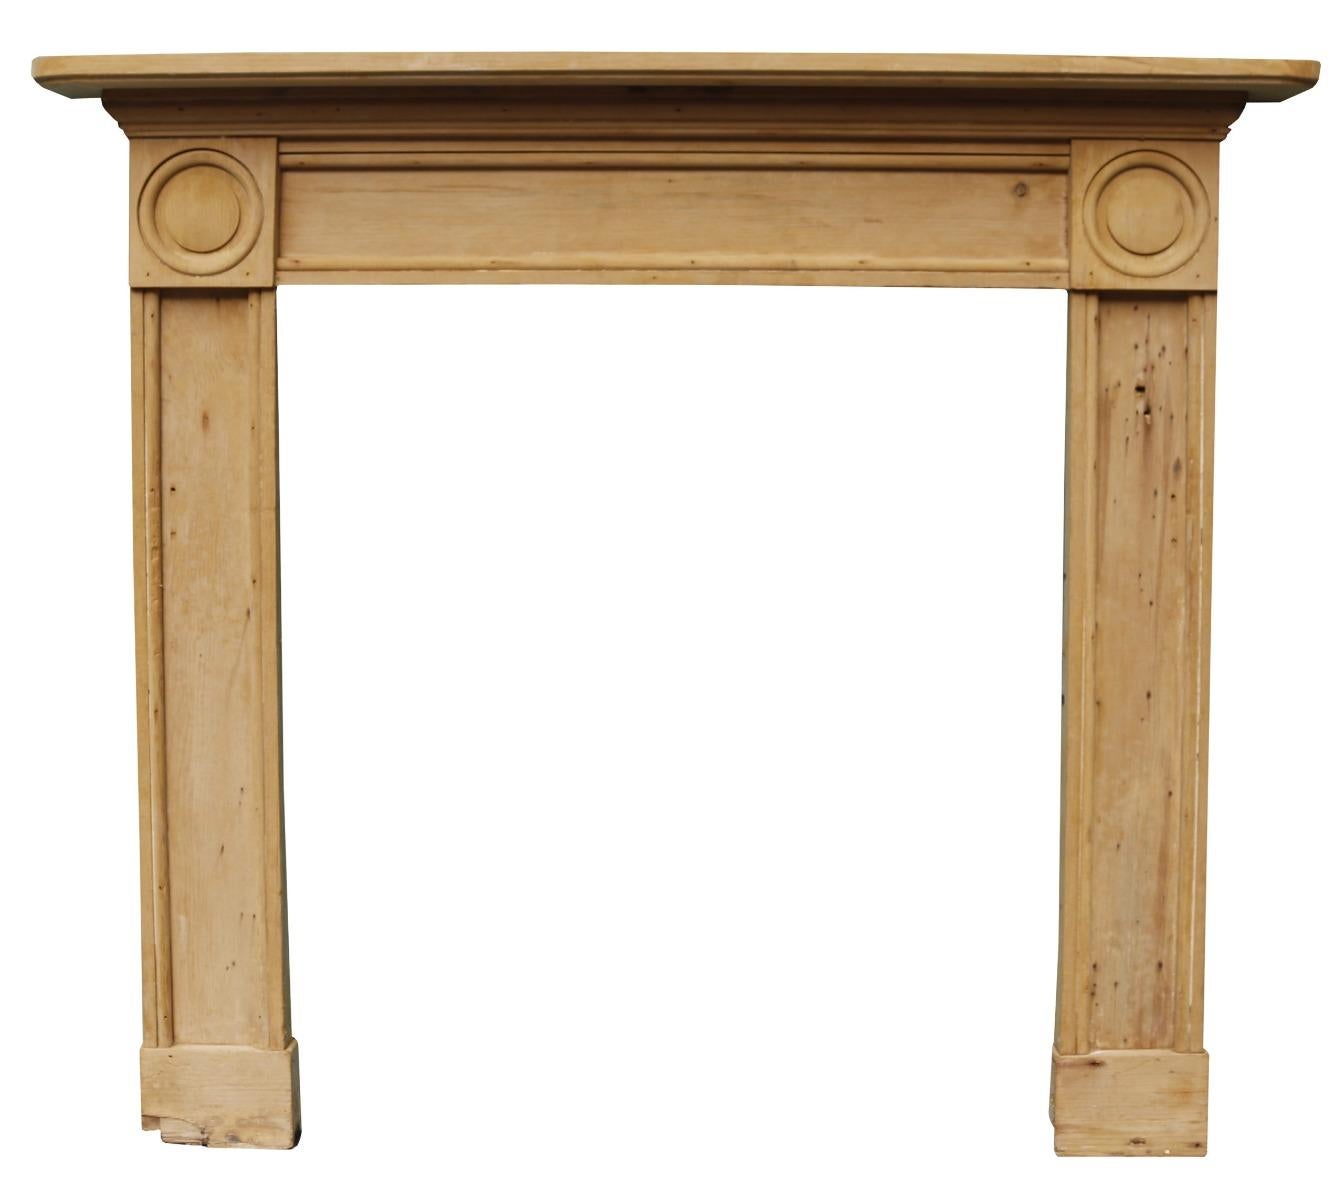 A late Georgian Bulls-eye style fire surround, reclaimed a farmhouse in Norfolk.

We have two of these surrounds available.

Additional Dimensions:

Opening height 96.5 cm

Opening width 86.5 cm

Width between outside of the foot blocks